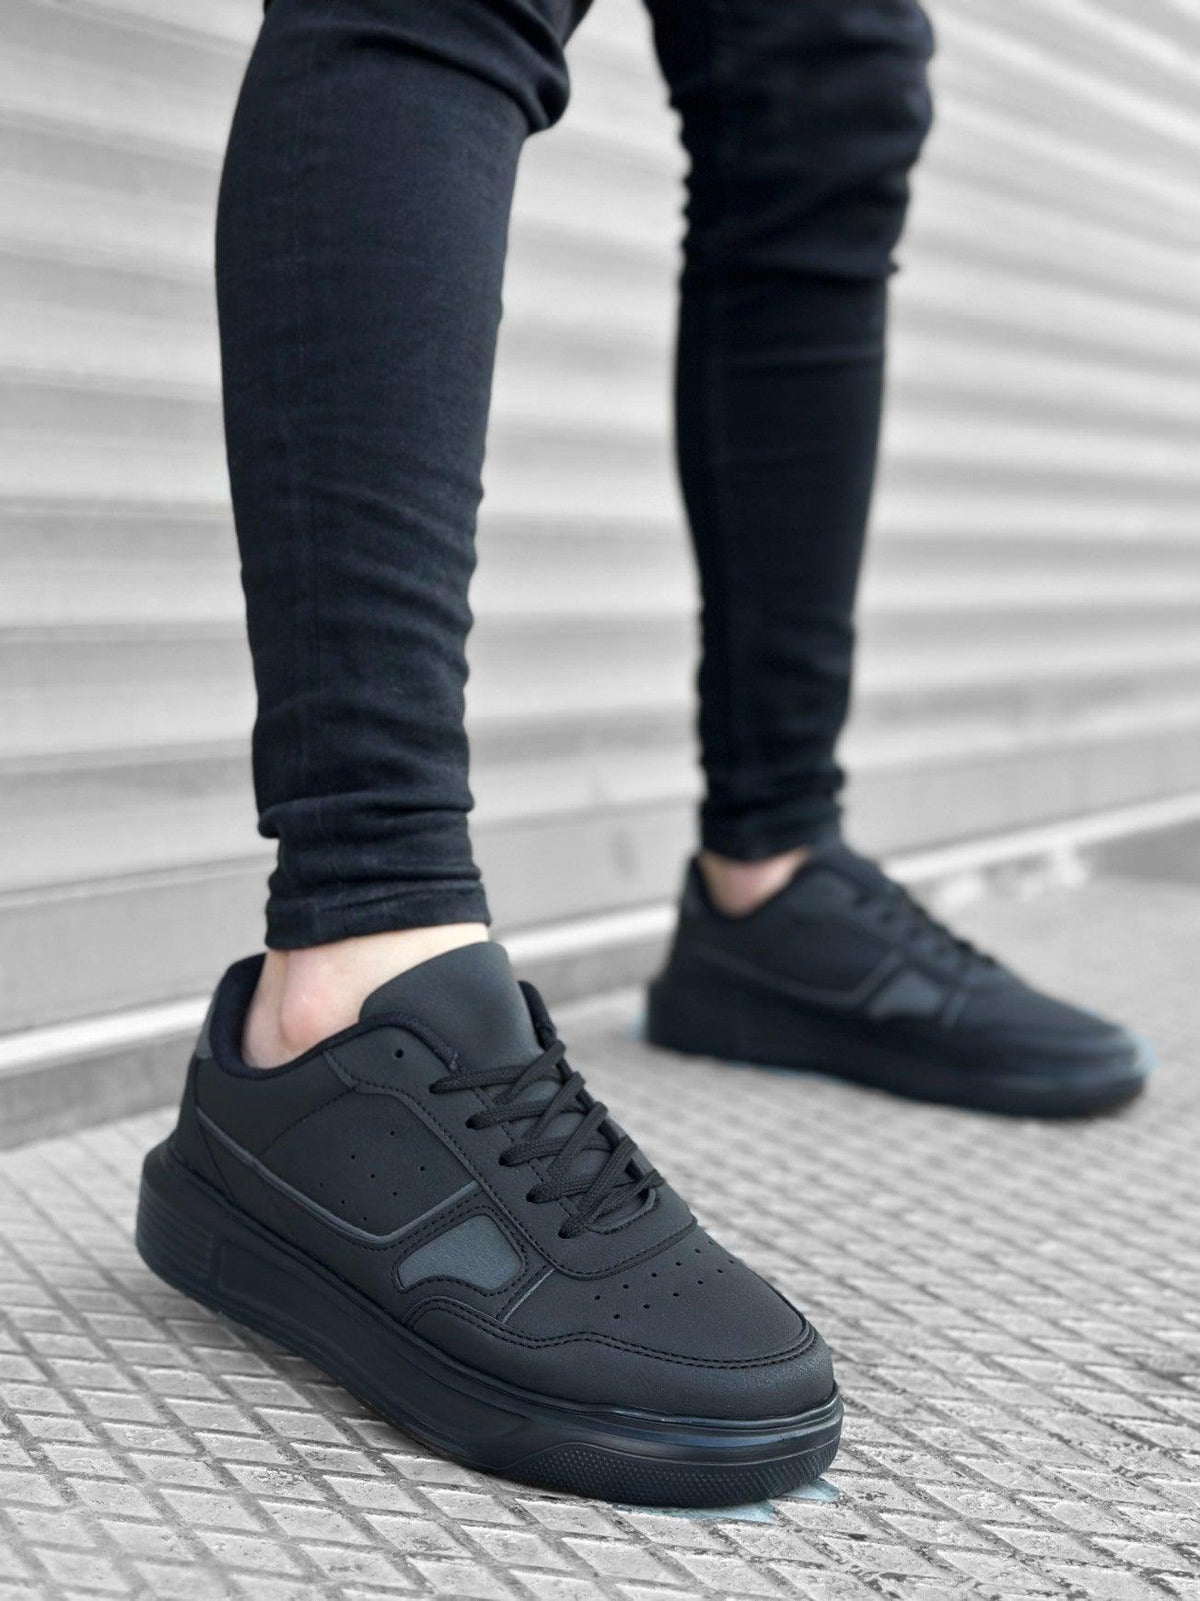 BA0221 Thick High Sole Lace-Up Black Men's Sneakers Shoes - STREET MODE ™